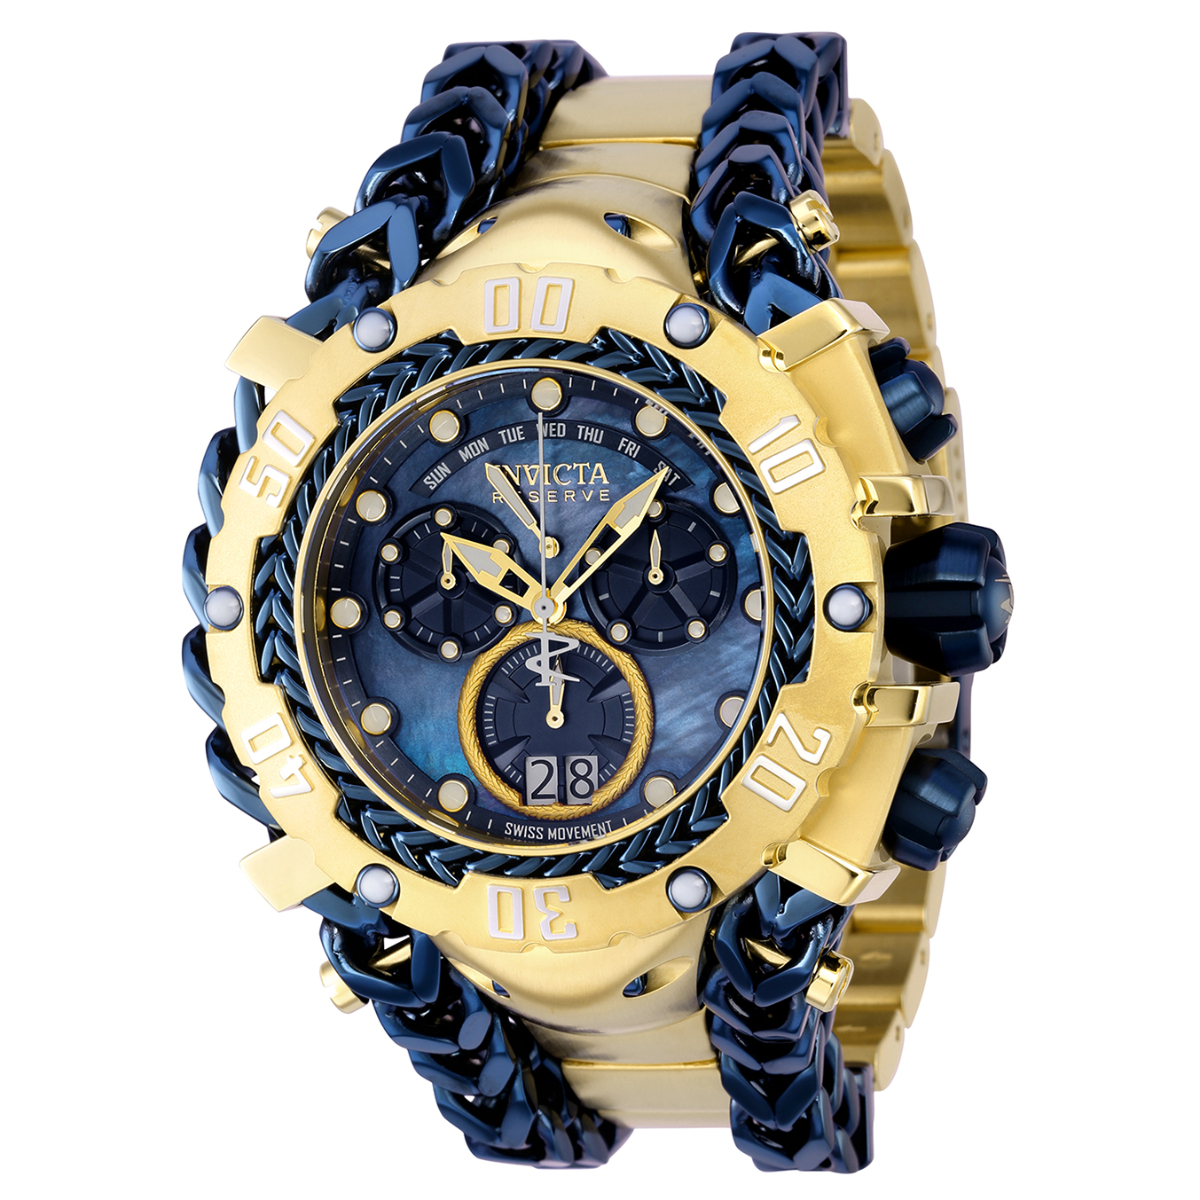 Invicta Reserve Gladiator Men's Watch w/Mother of Pearl Dial - 55.25mm, Gold, Dark Blue (36891)